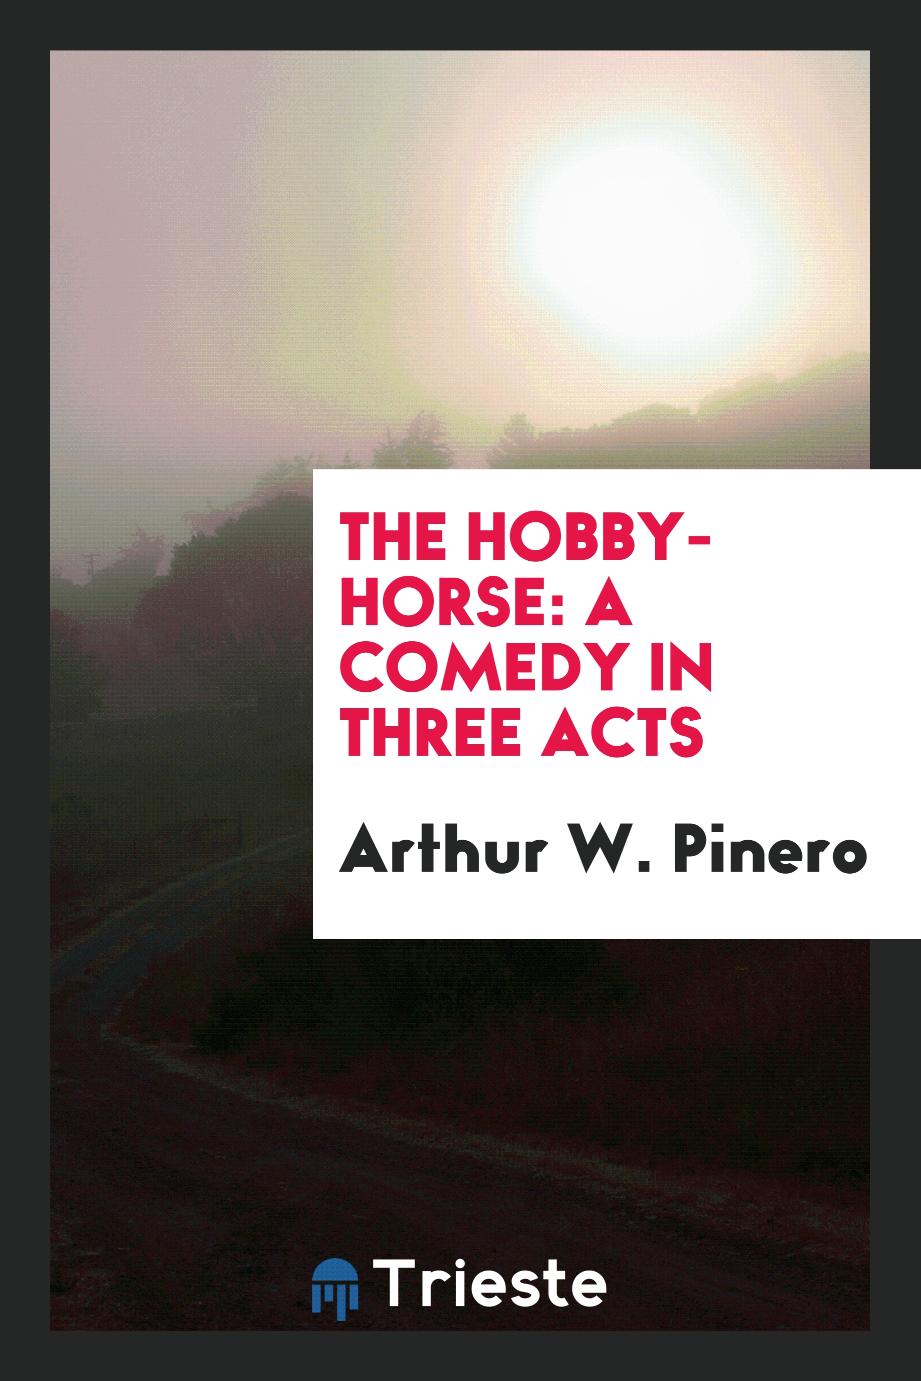 The Hobby-Horse: A Comedy in Three Acts